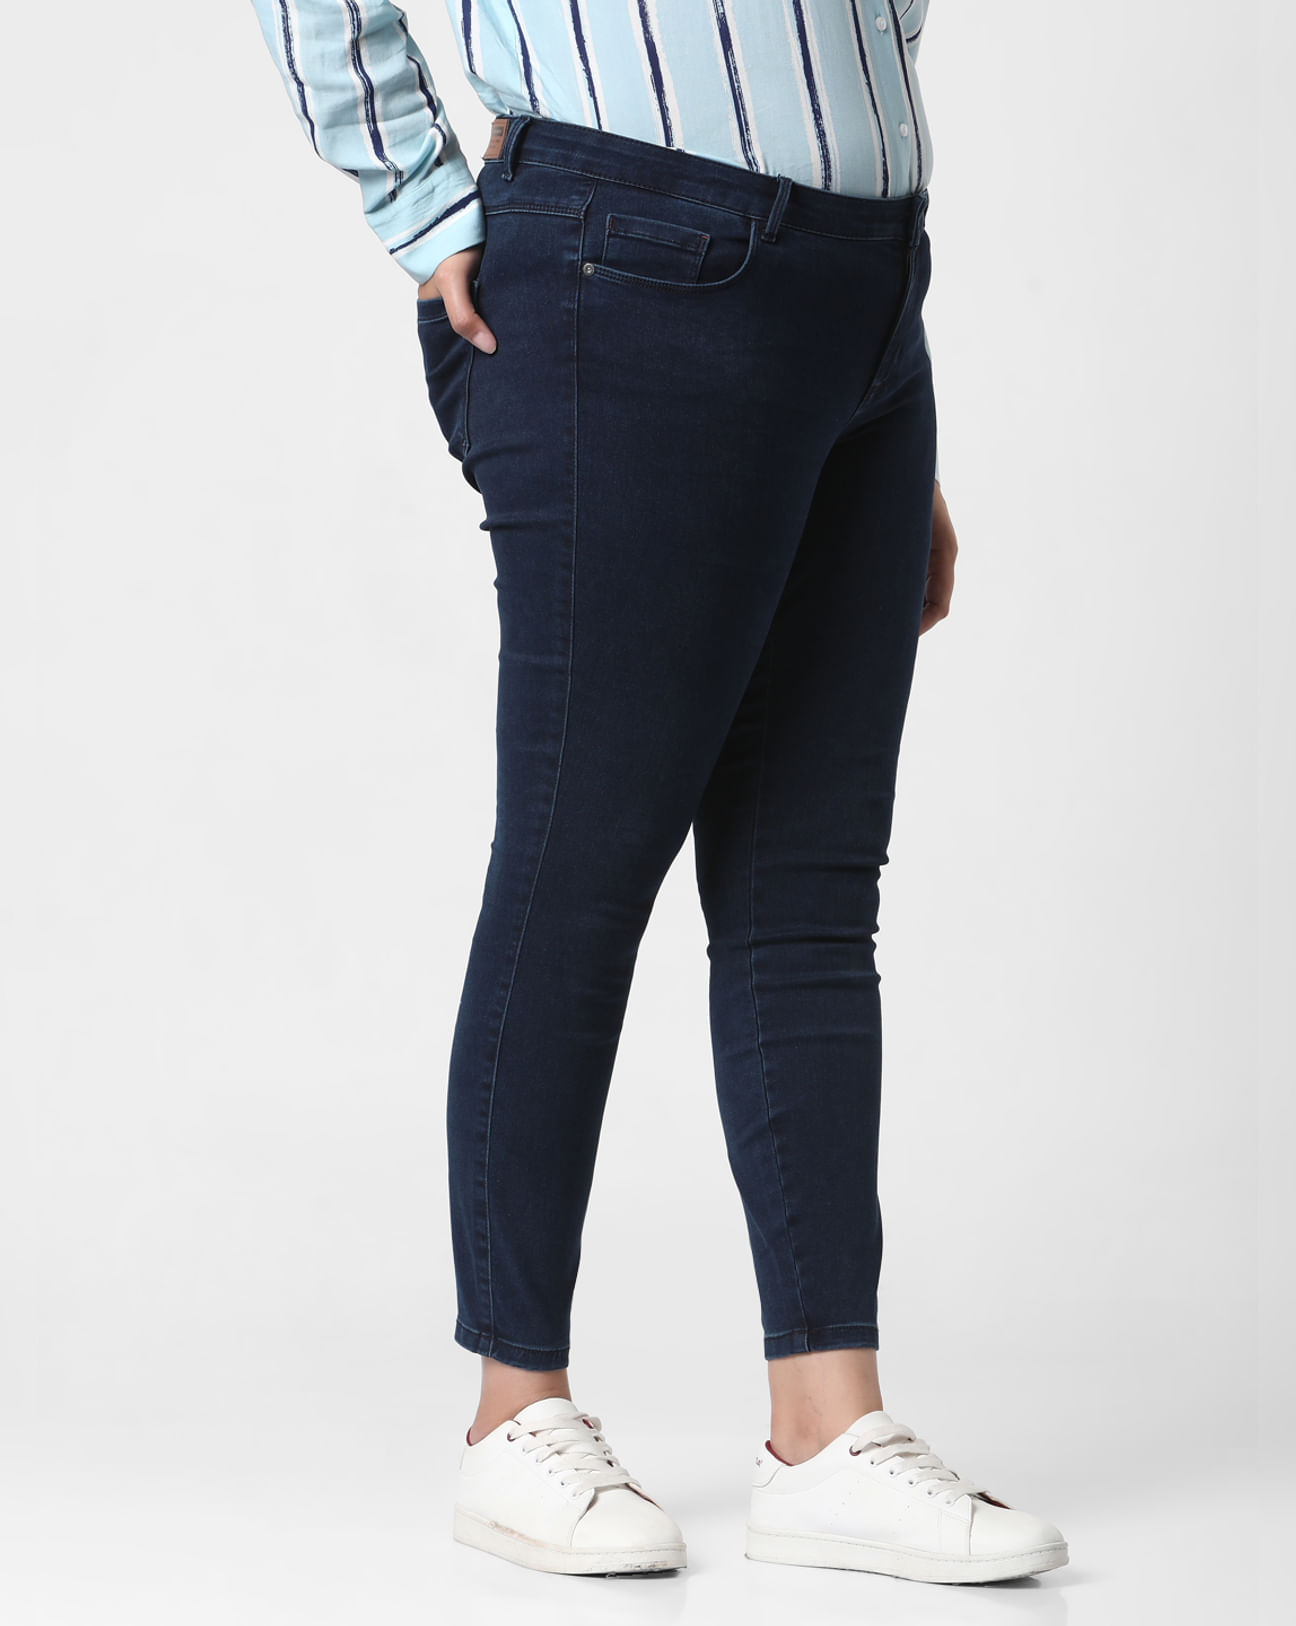 Women's Tall Jeggings in Classic Mid Blue